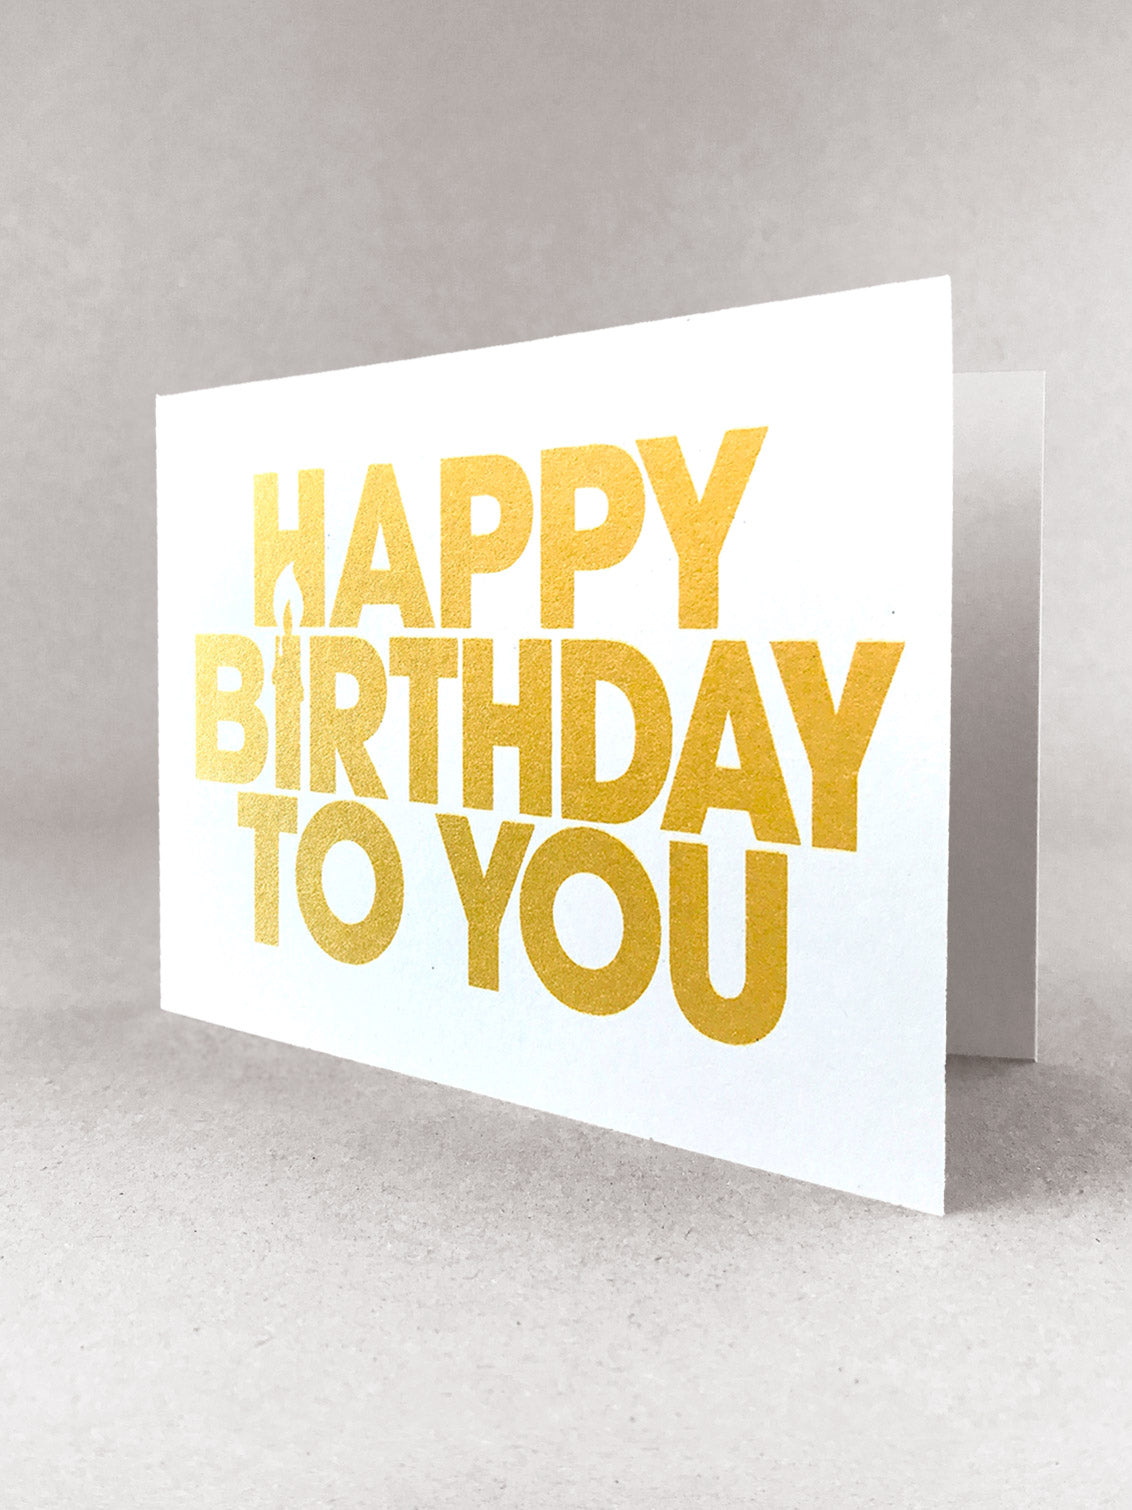 Happy birthday to you card - Gold